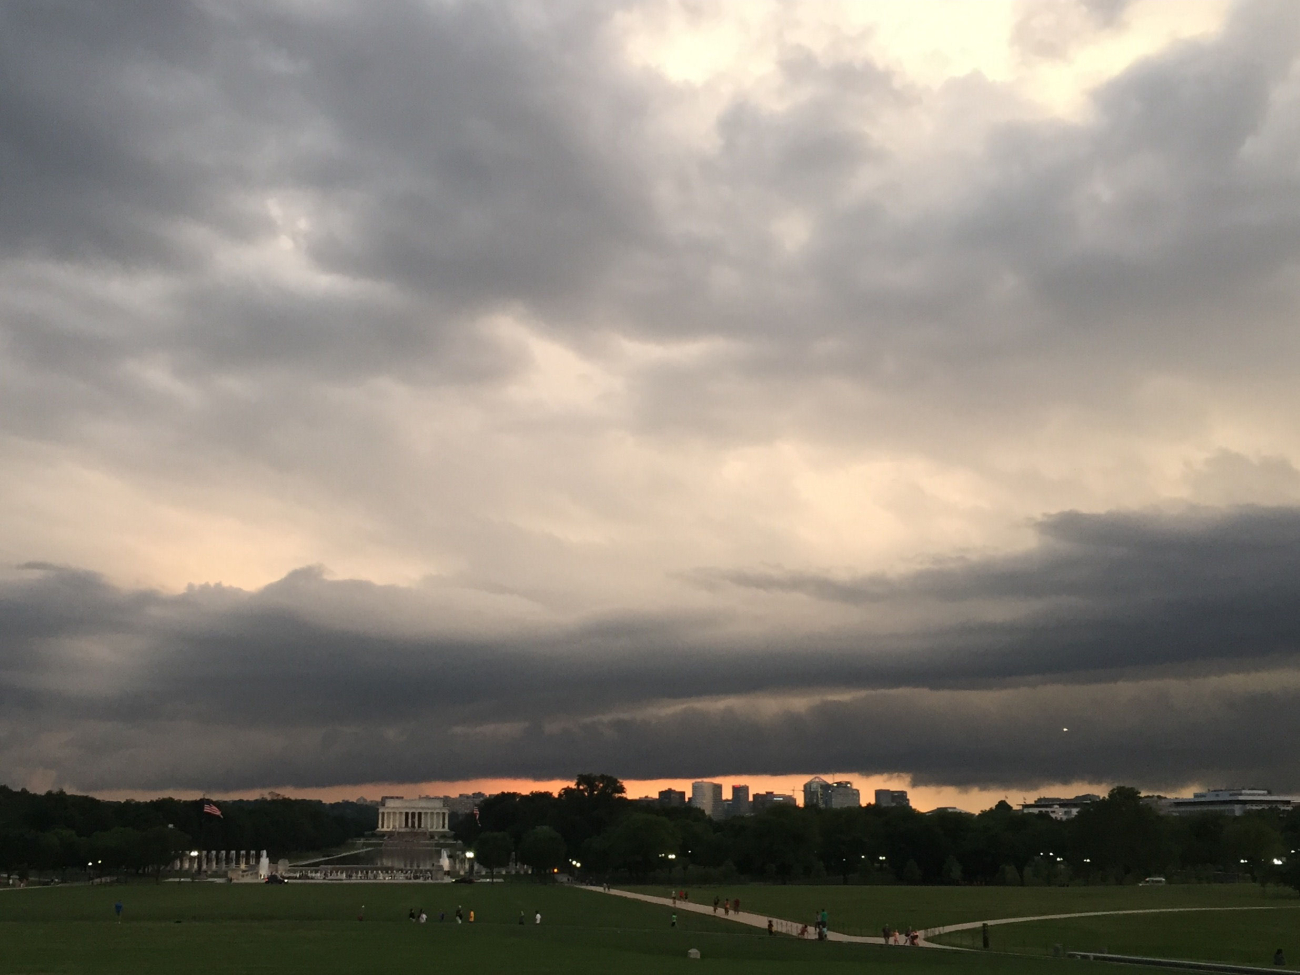 A storm approaching the National Mall